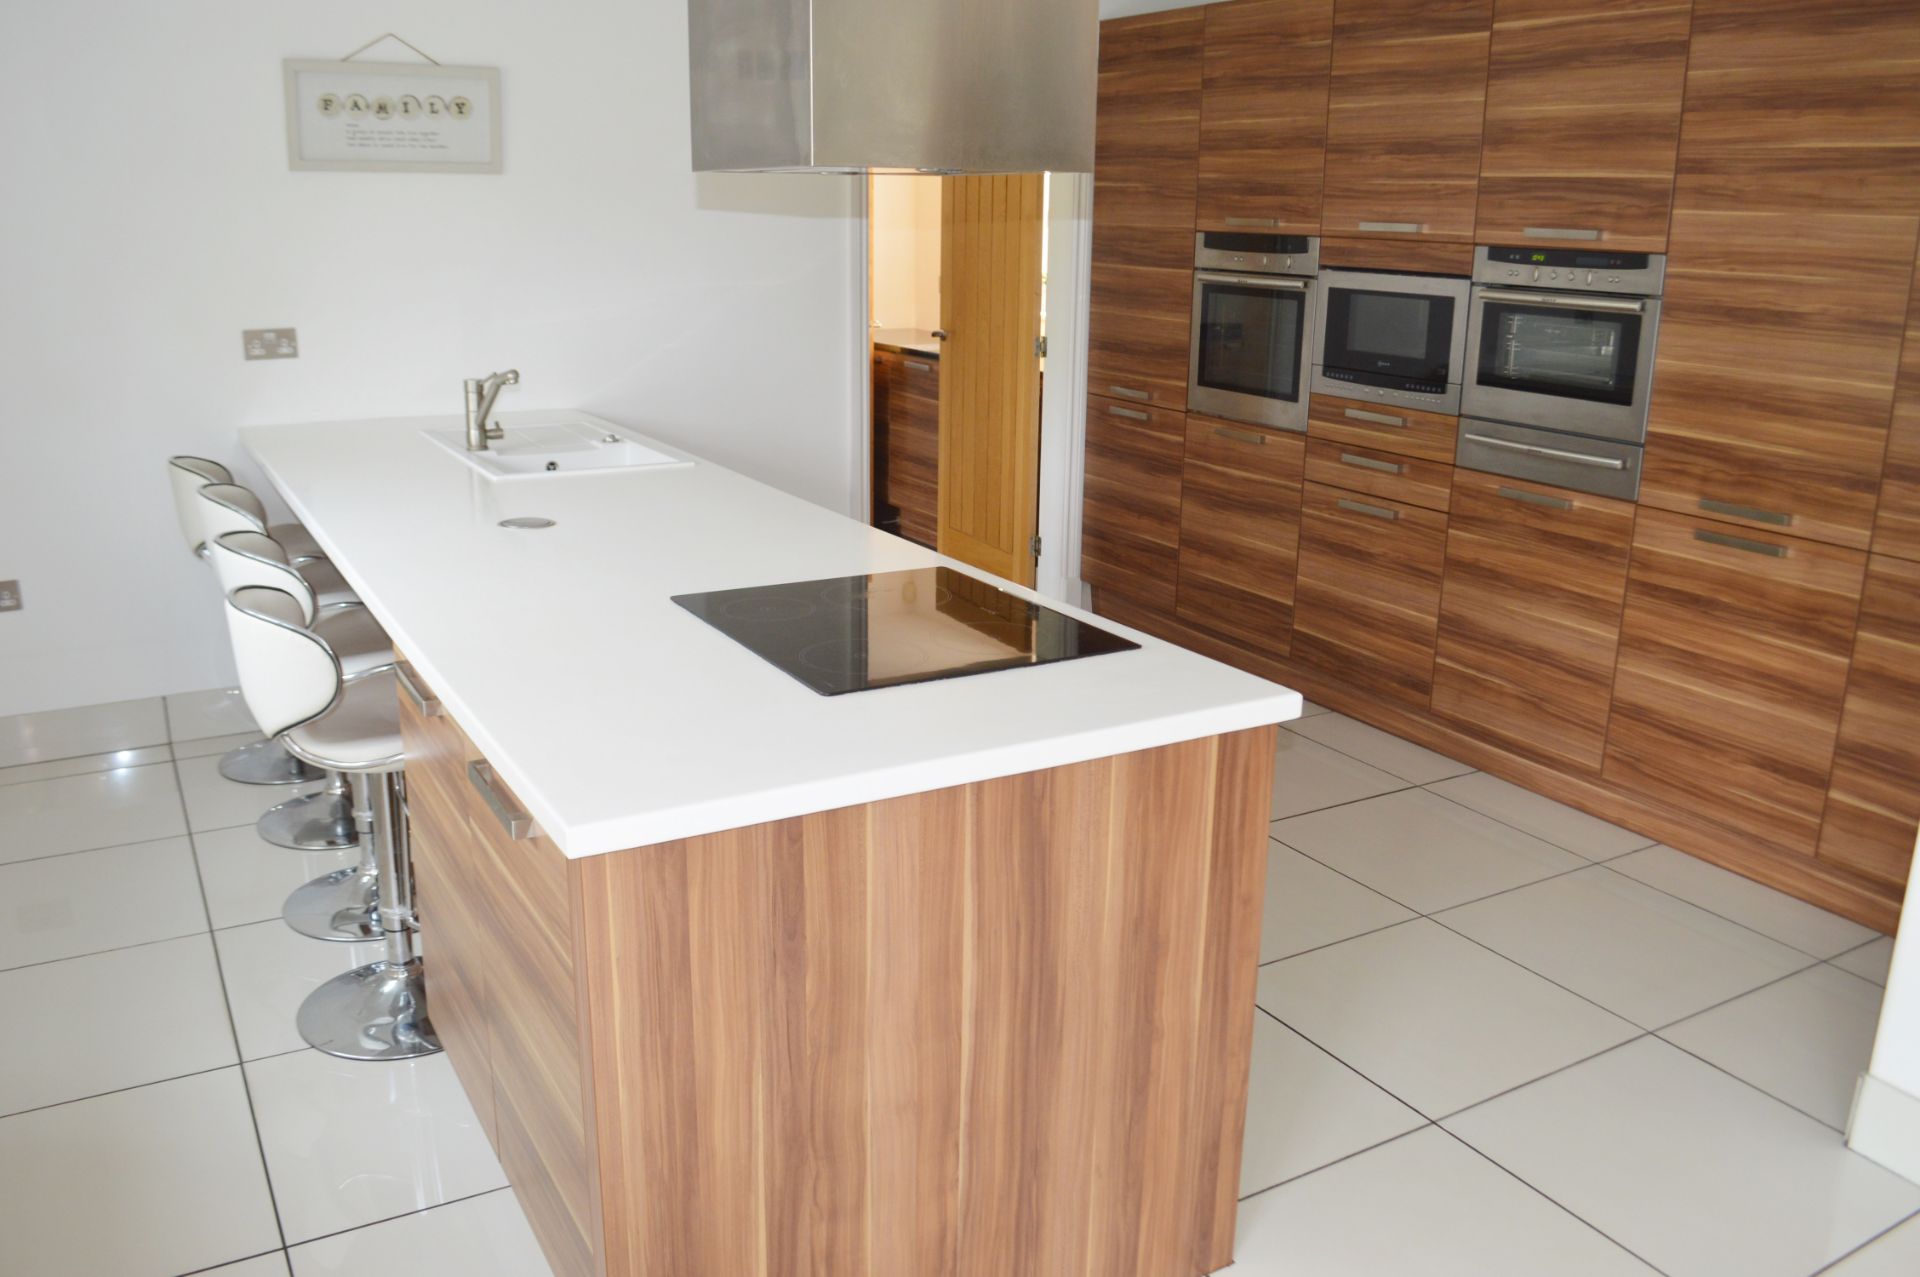 1 x Contemporary Bespoke Fitted Kitchen And Utilty Room  With Integrated Neff Branded Appliances,